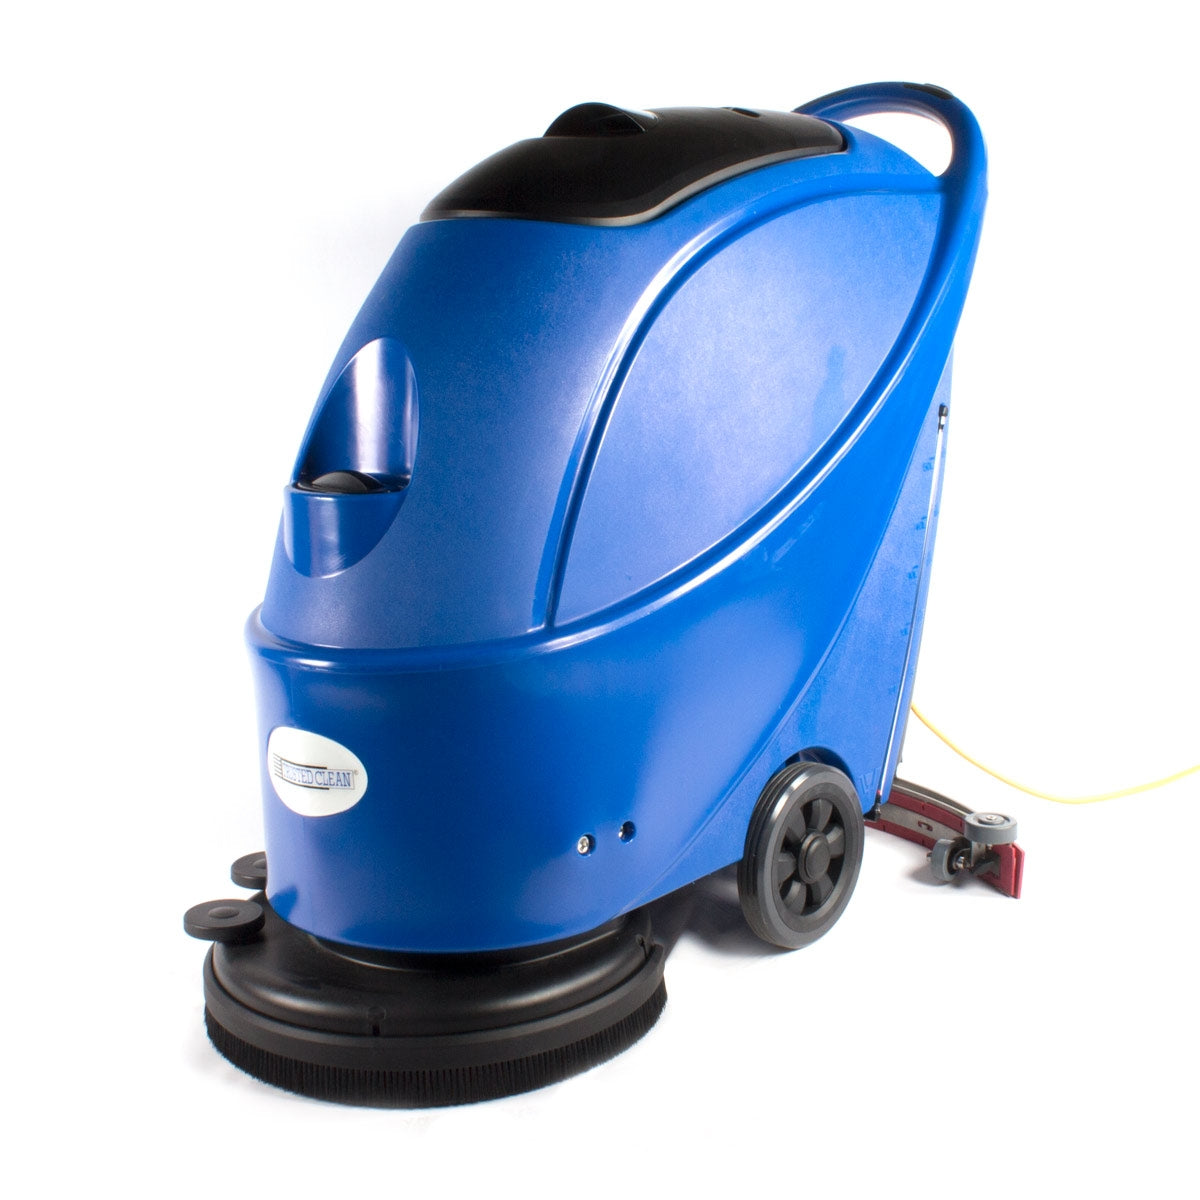 Trusted Clean Floor Cleaning Machines Thumbnail